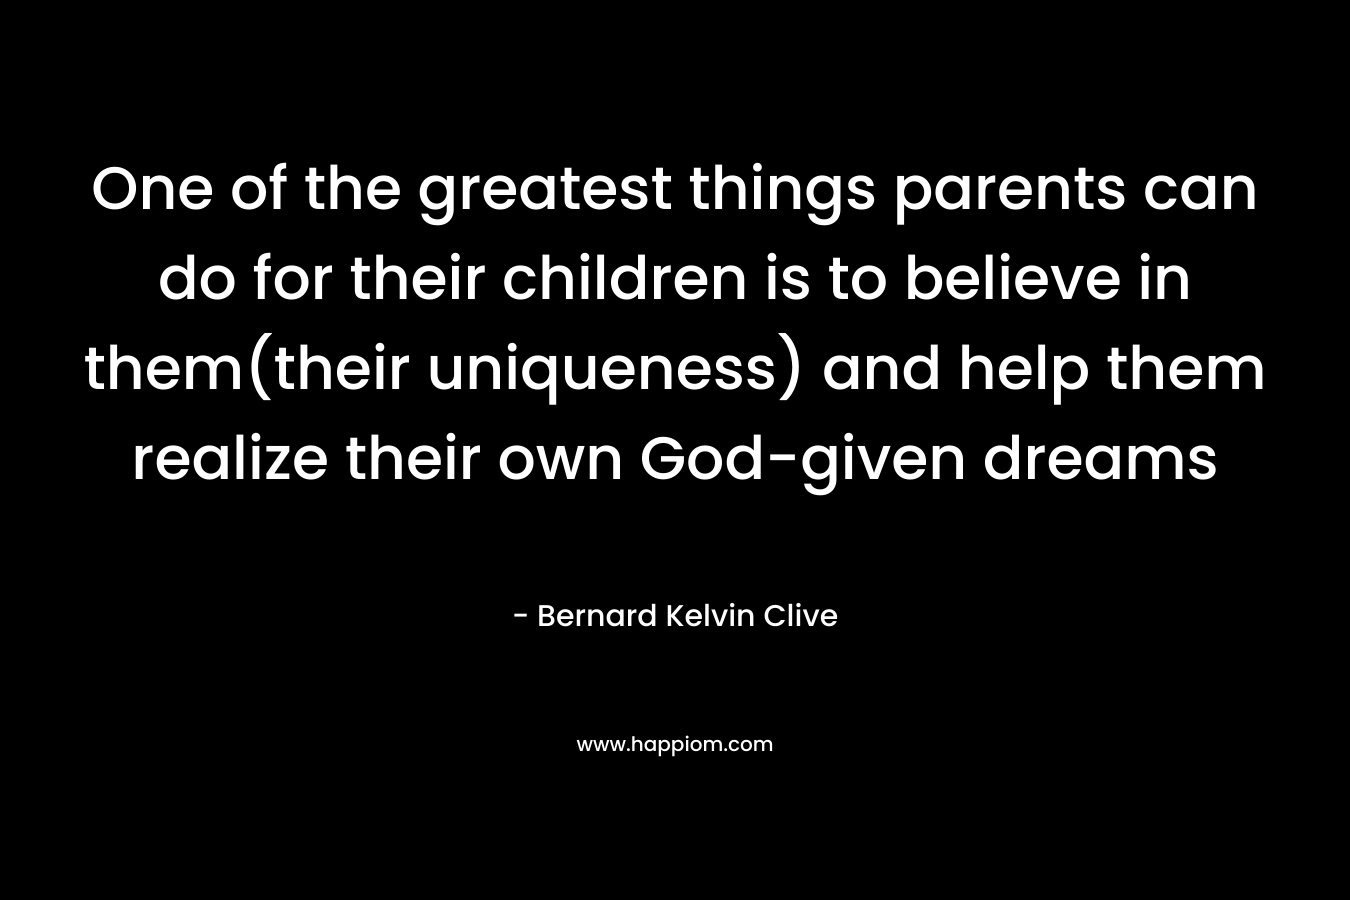 One of the greatest things parents can do for their children is to believe in them(their uniqueness) and help them realize their own God-given dreams – Bernard Kelvin Clive